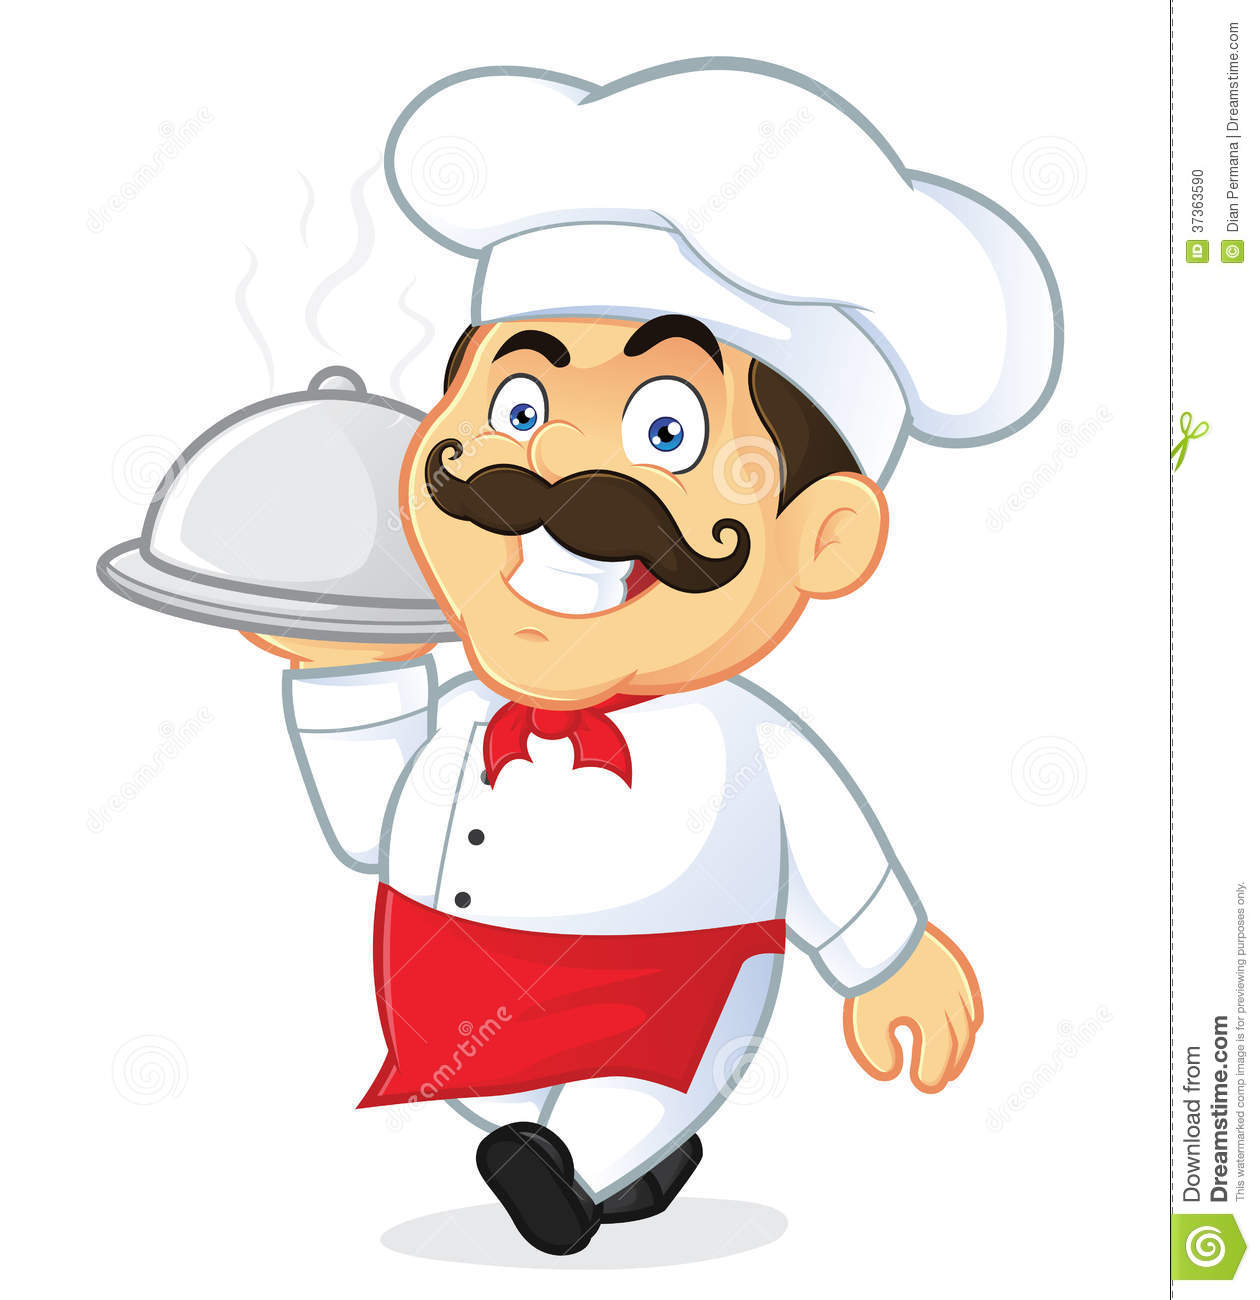 chef holding covered food tra